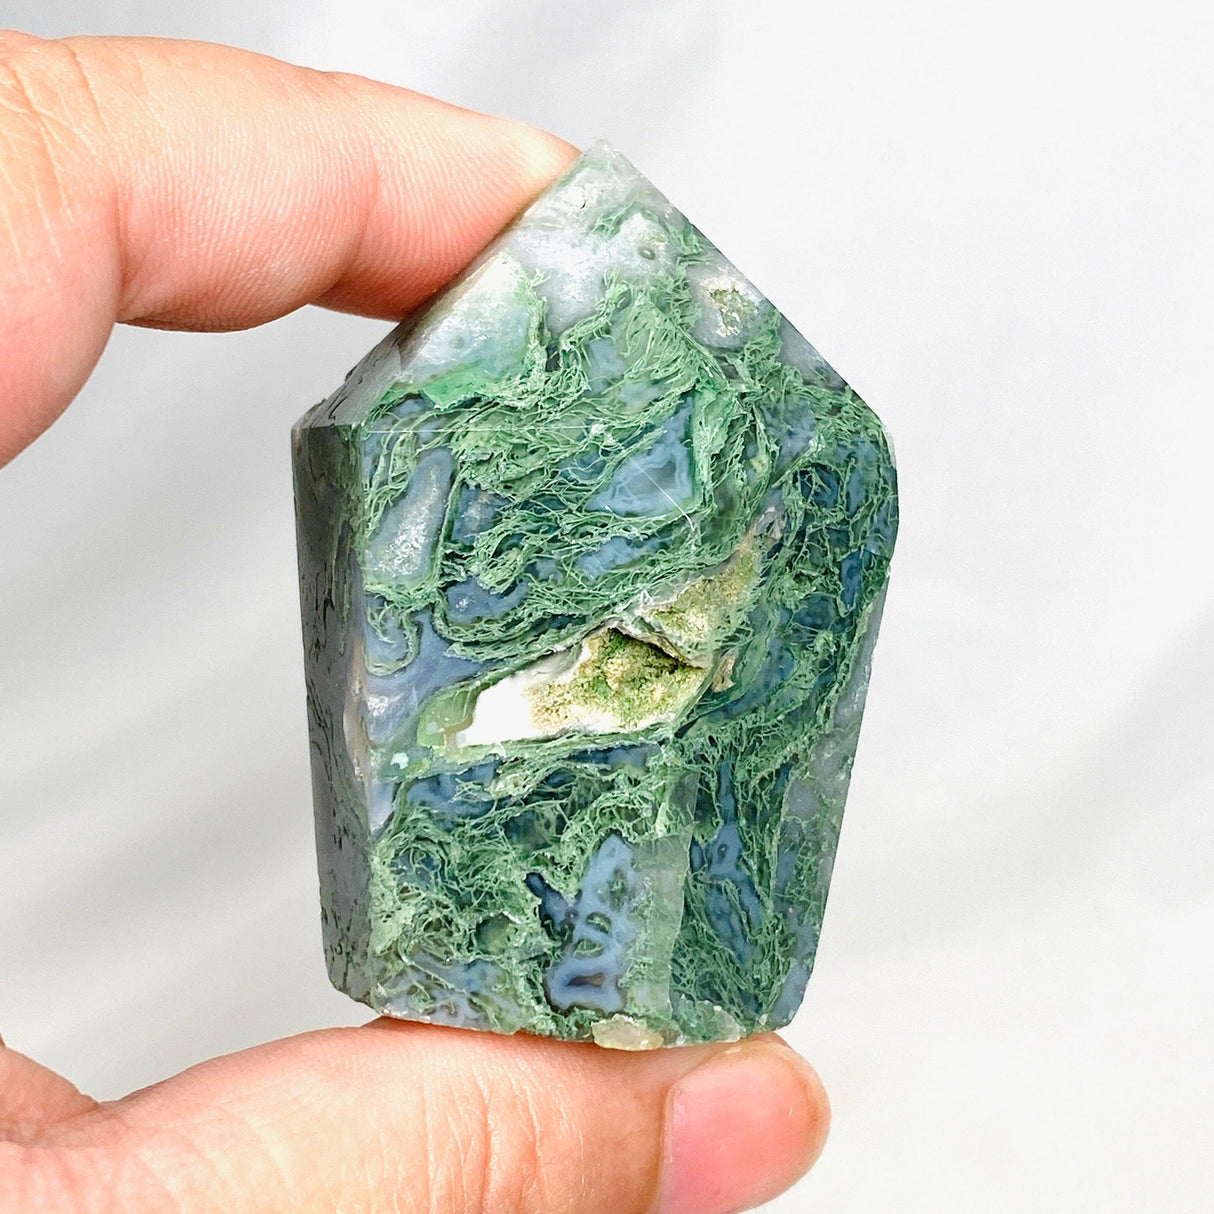 Green Moss Agate Point - Nature's Magick